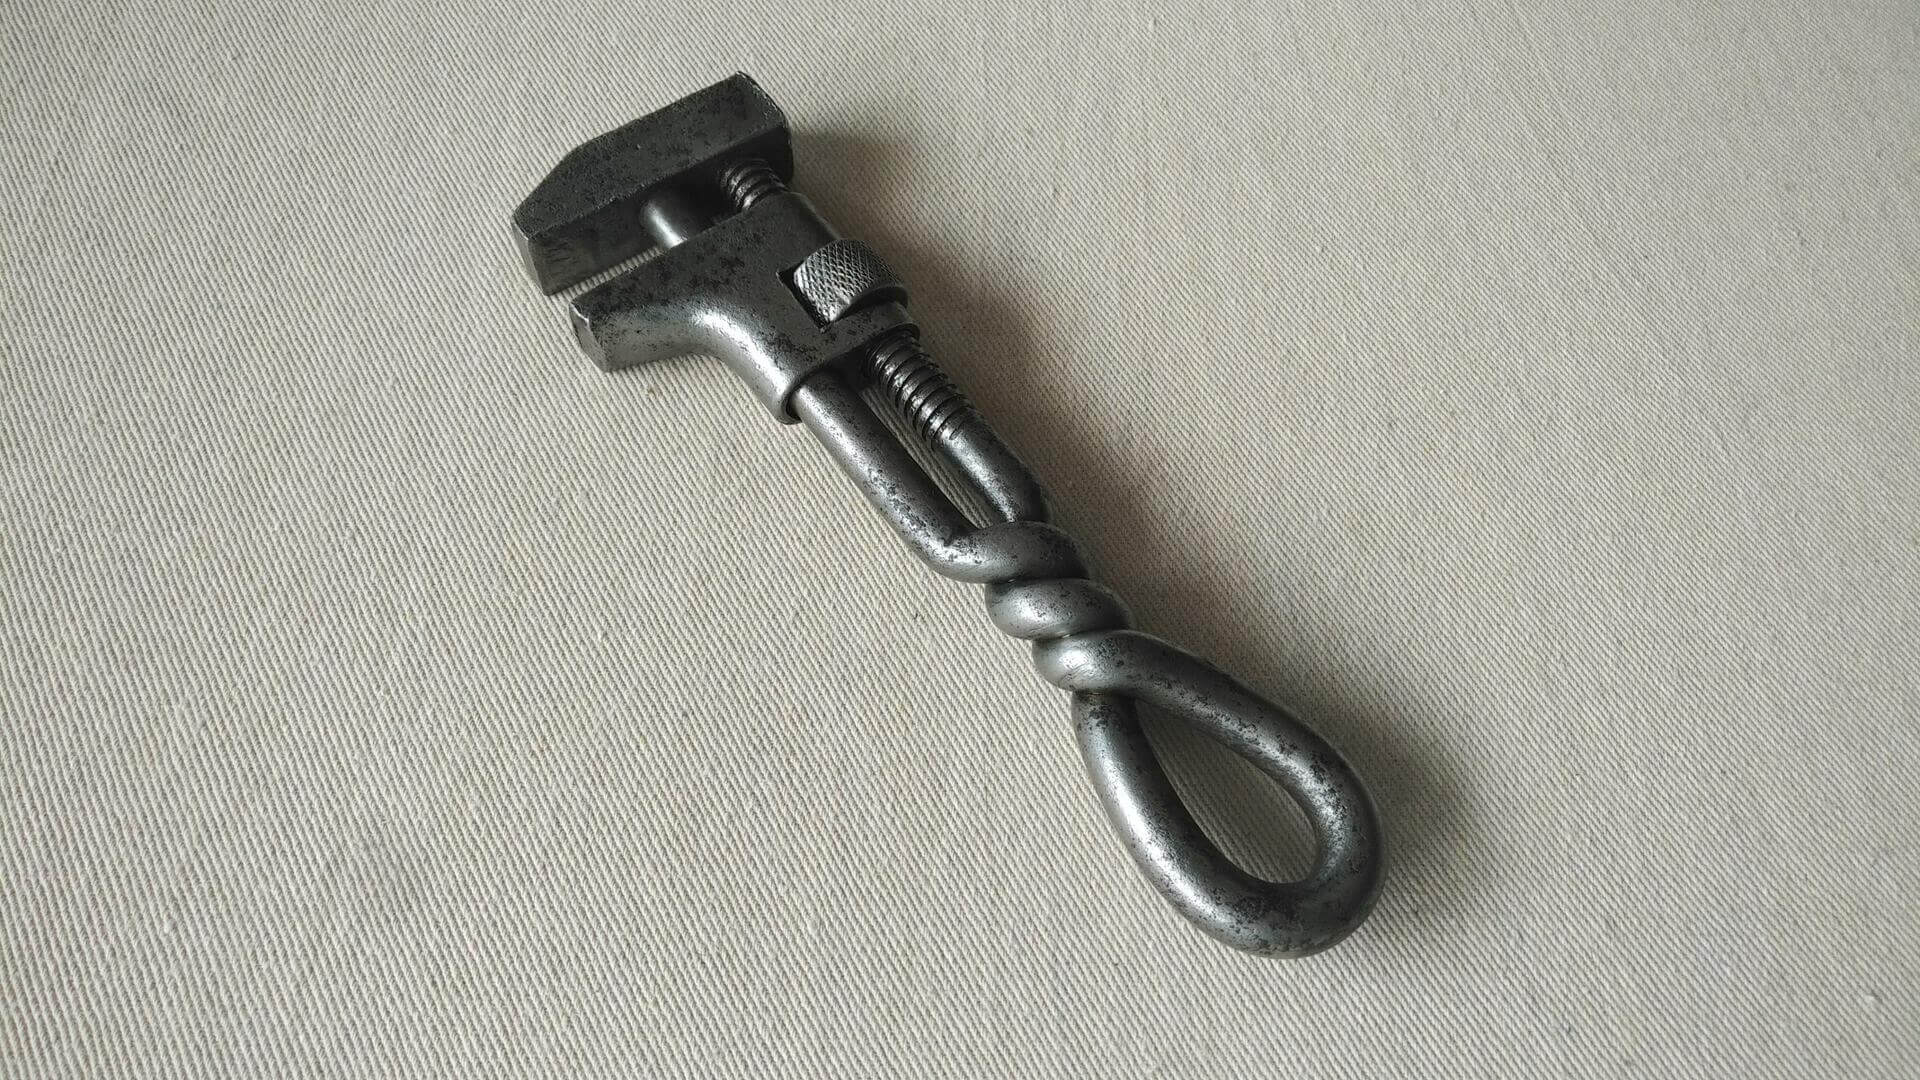 Rare vintage Whitman & Barnes 8" adjustable monkey wrench w twist handle 2" jaw capacity. Antique made in USA collectible machinist & automotive hand tools